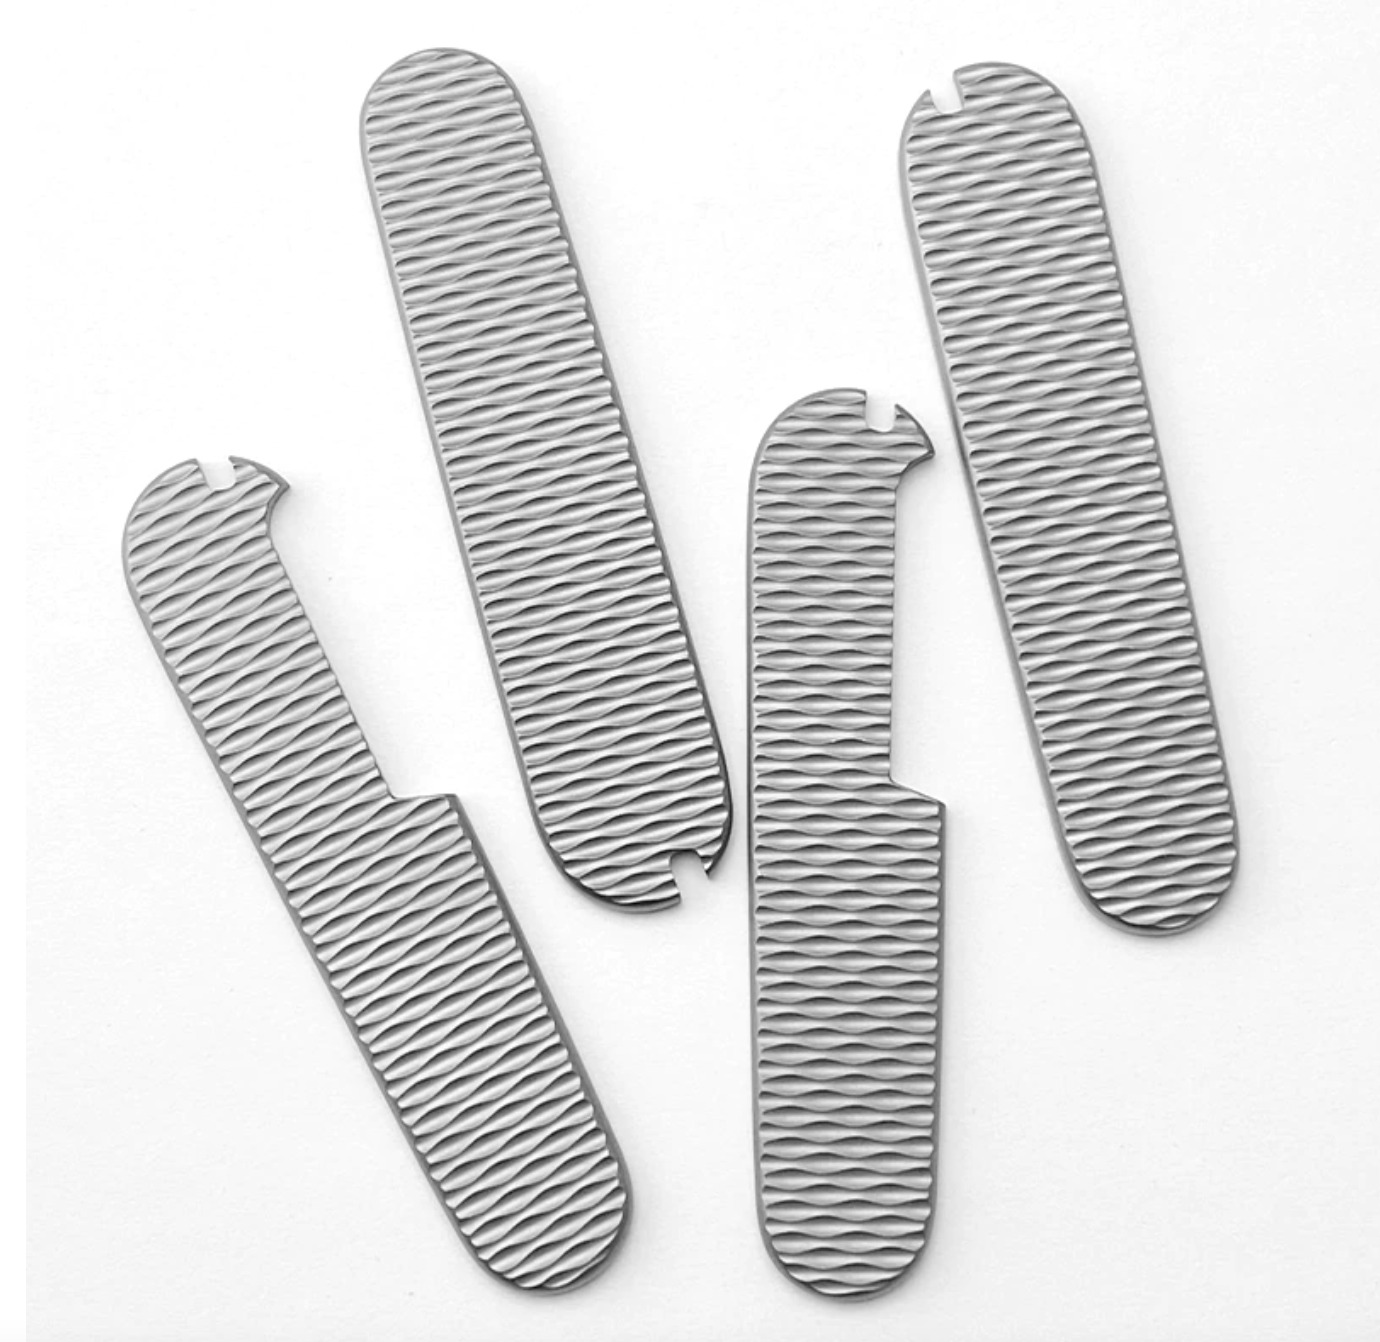 Victorinox 91mm Titanium Scales NEW Pattern Handle For Swiss Army Knife